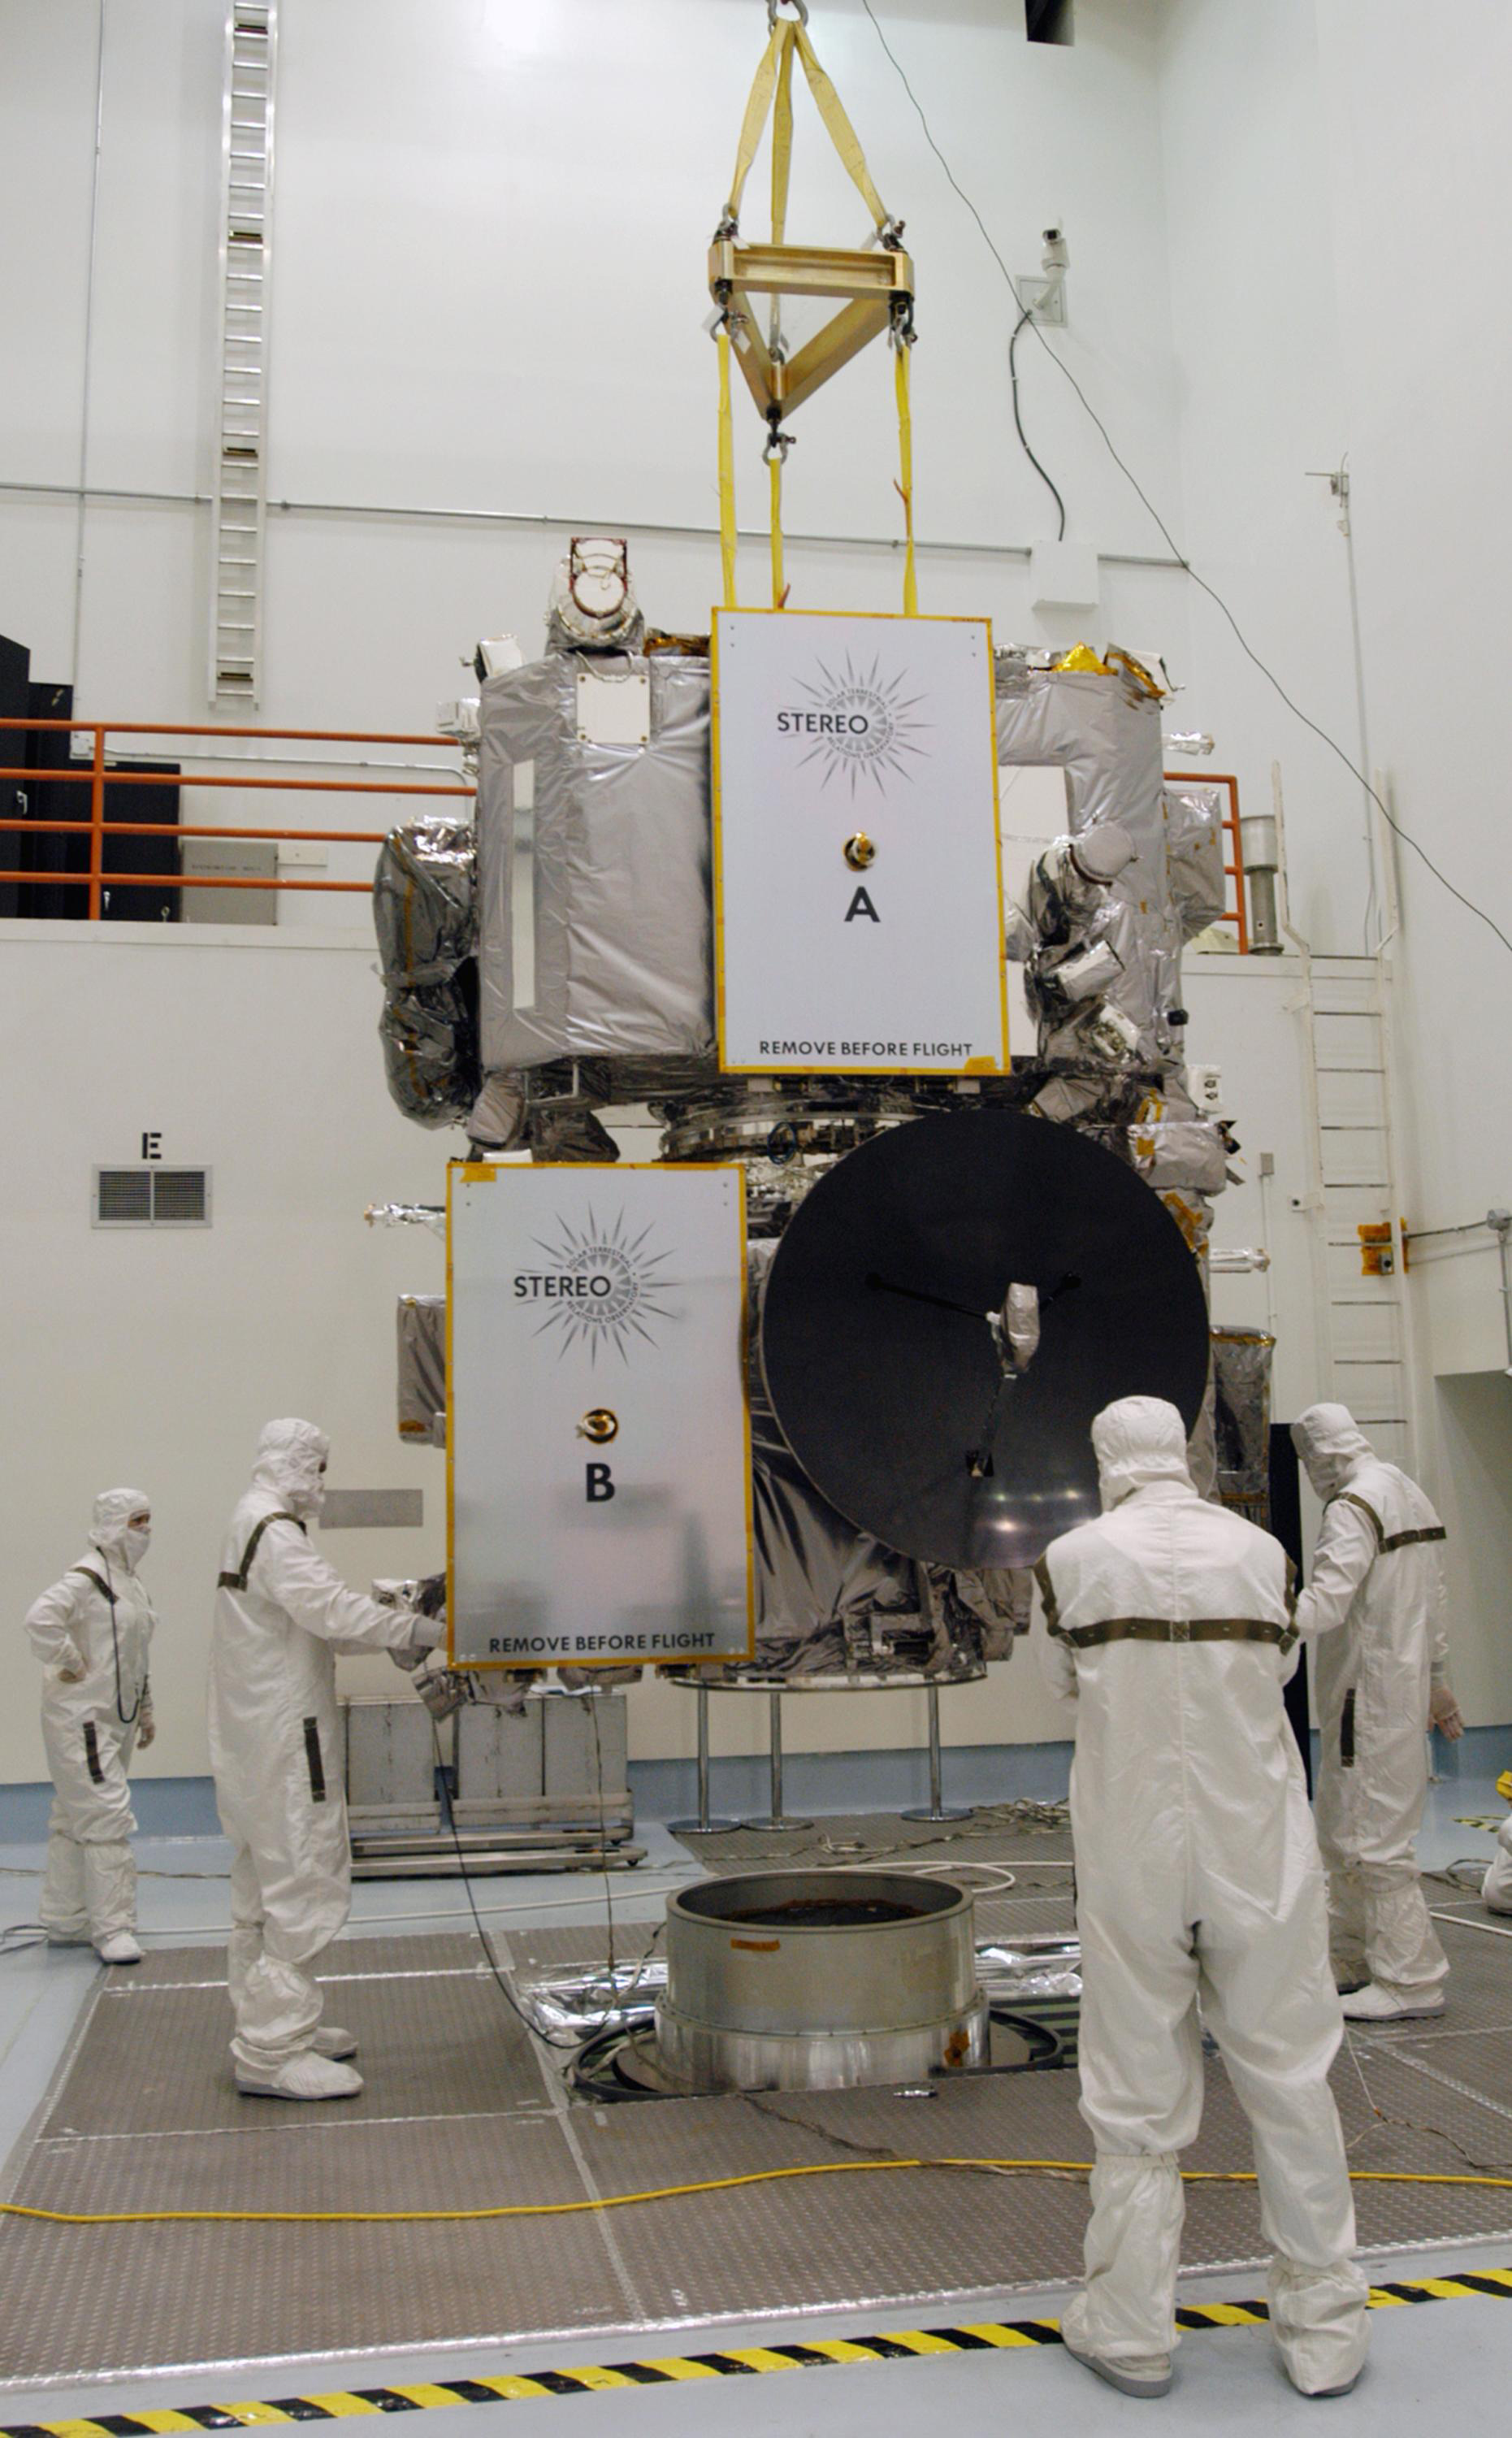 Technicians inside the Astrotech facility in Titusville, Florida, move the STEREO spacecraft to the spin table